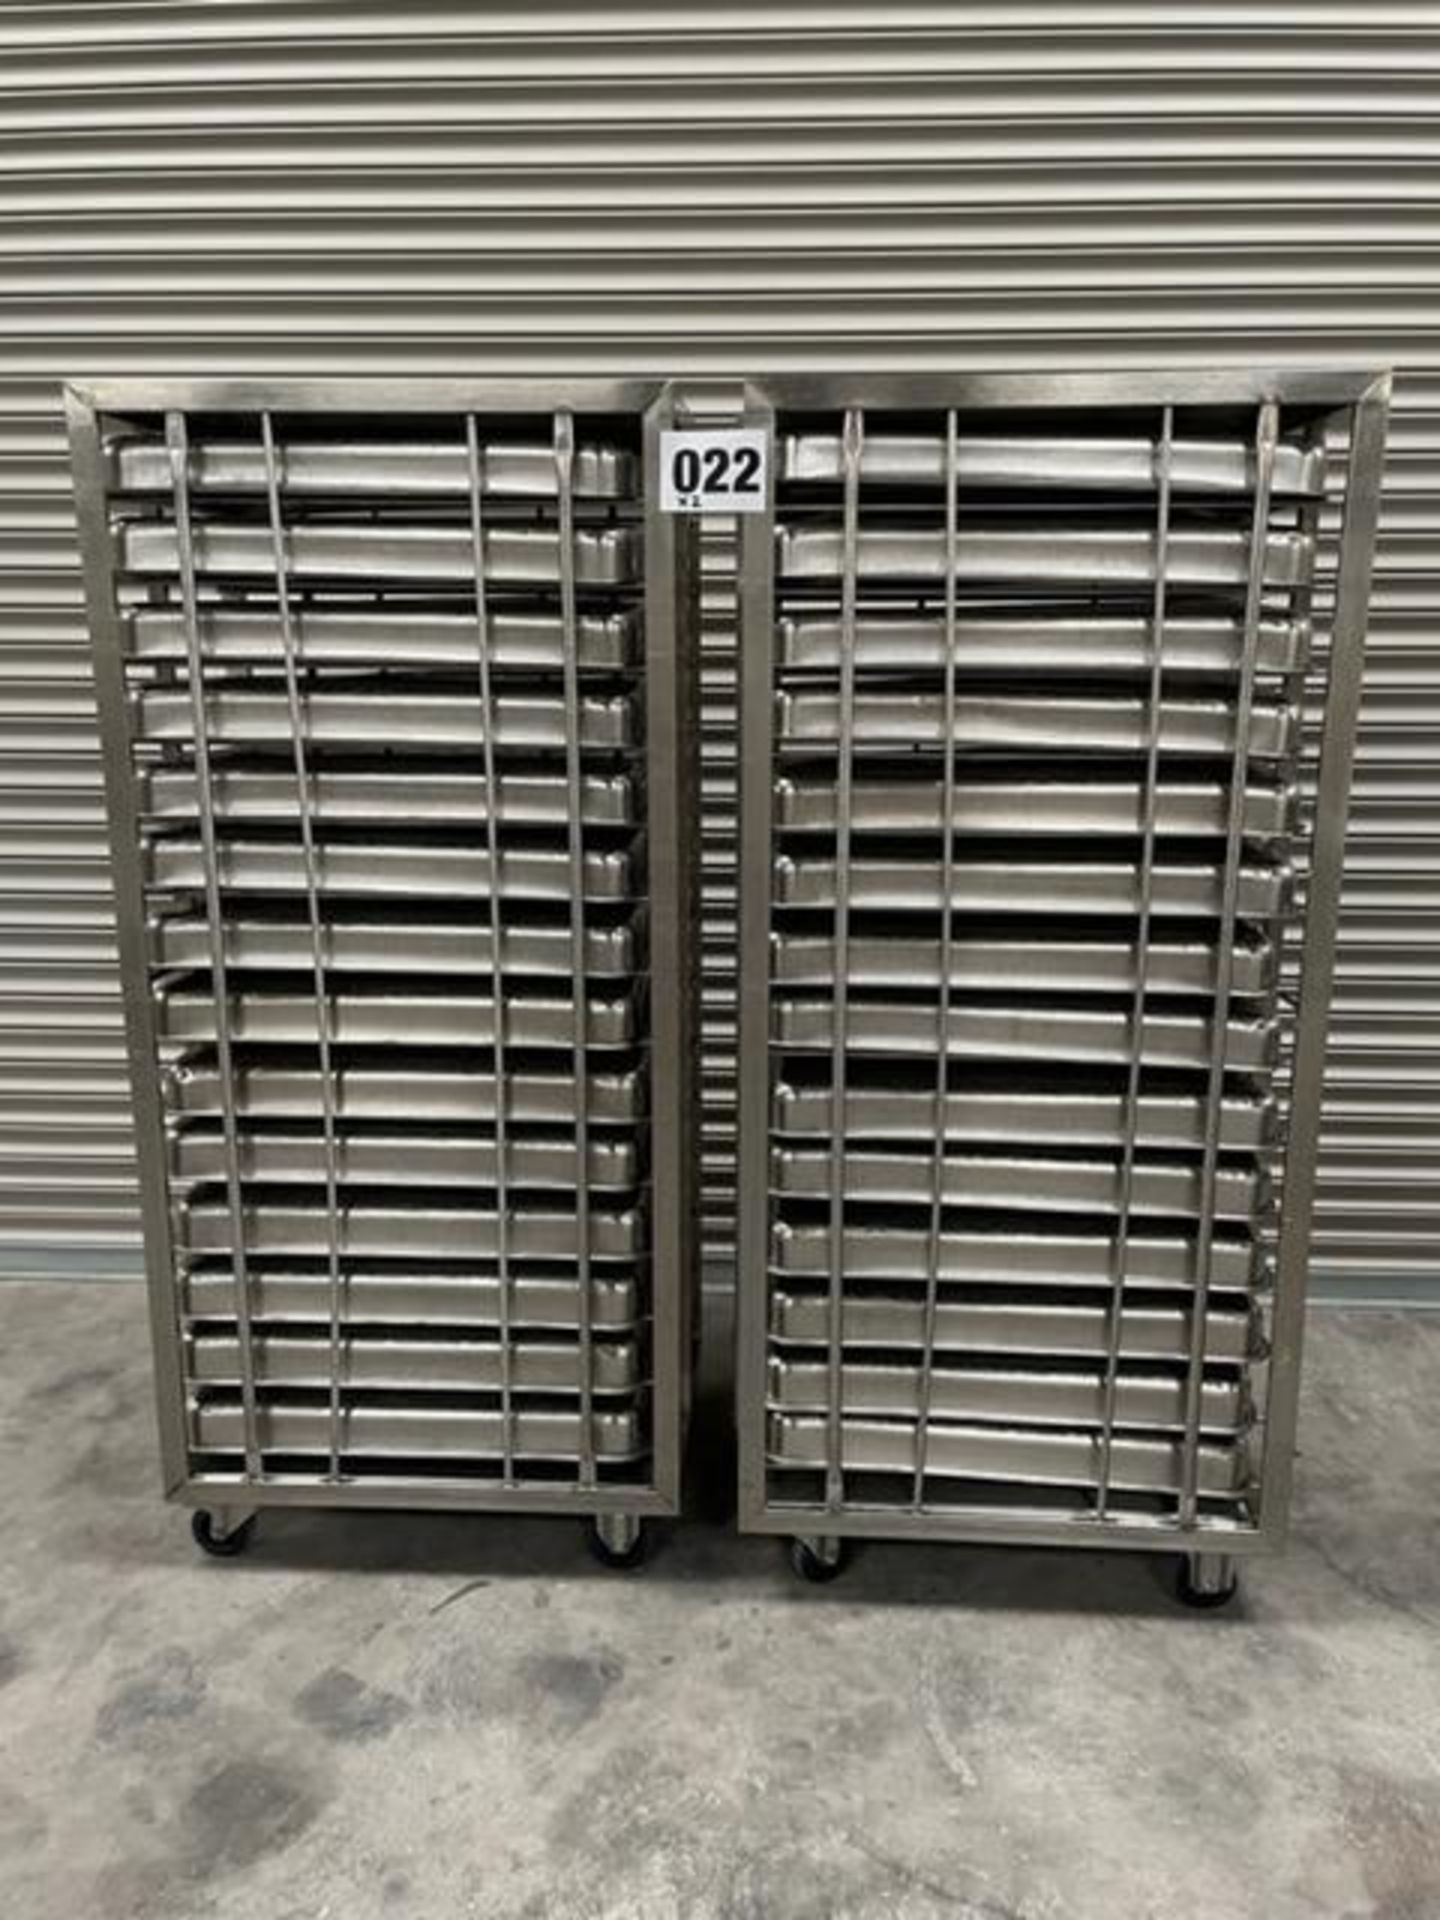 2 X UNITECH S/S RACKS COMPLETE WITH 14 GASTRO TRAYS IN EACH RACK.